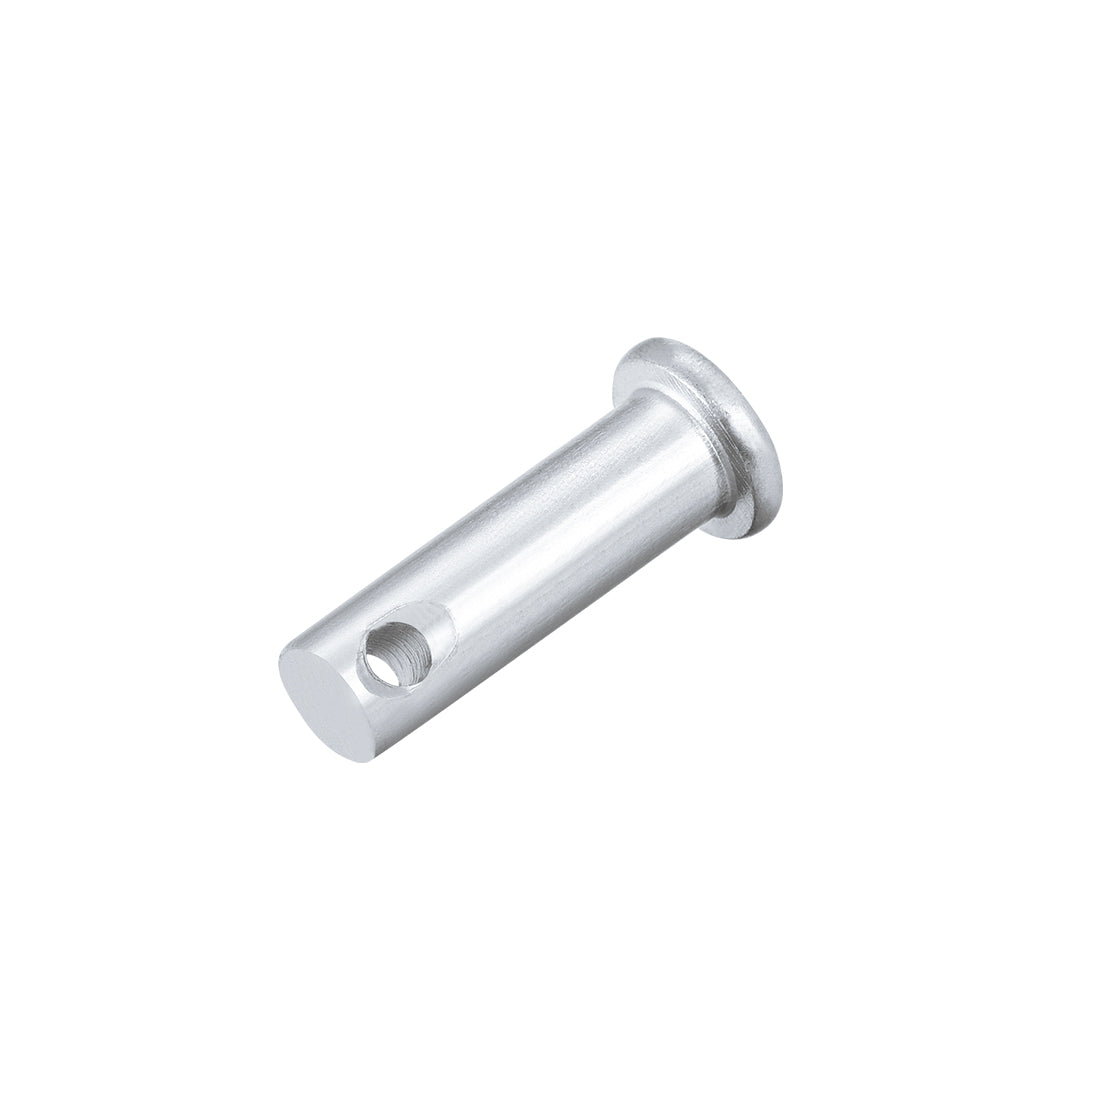 Uxcell Uxcell Single Hole Clevis Pins - 8mm x 55mm Flat Head Zinc-Plating Solid Steel Link Hinge Pin 20Pcs